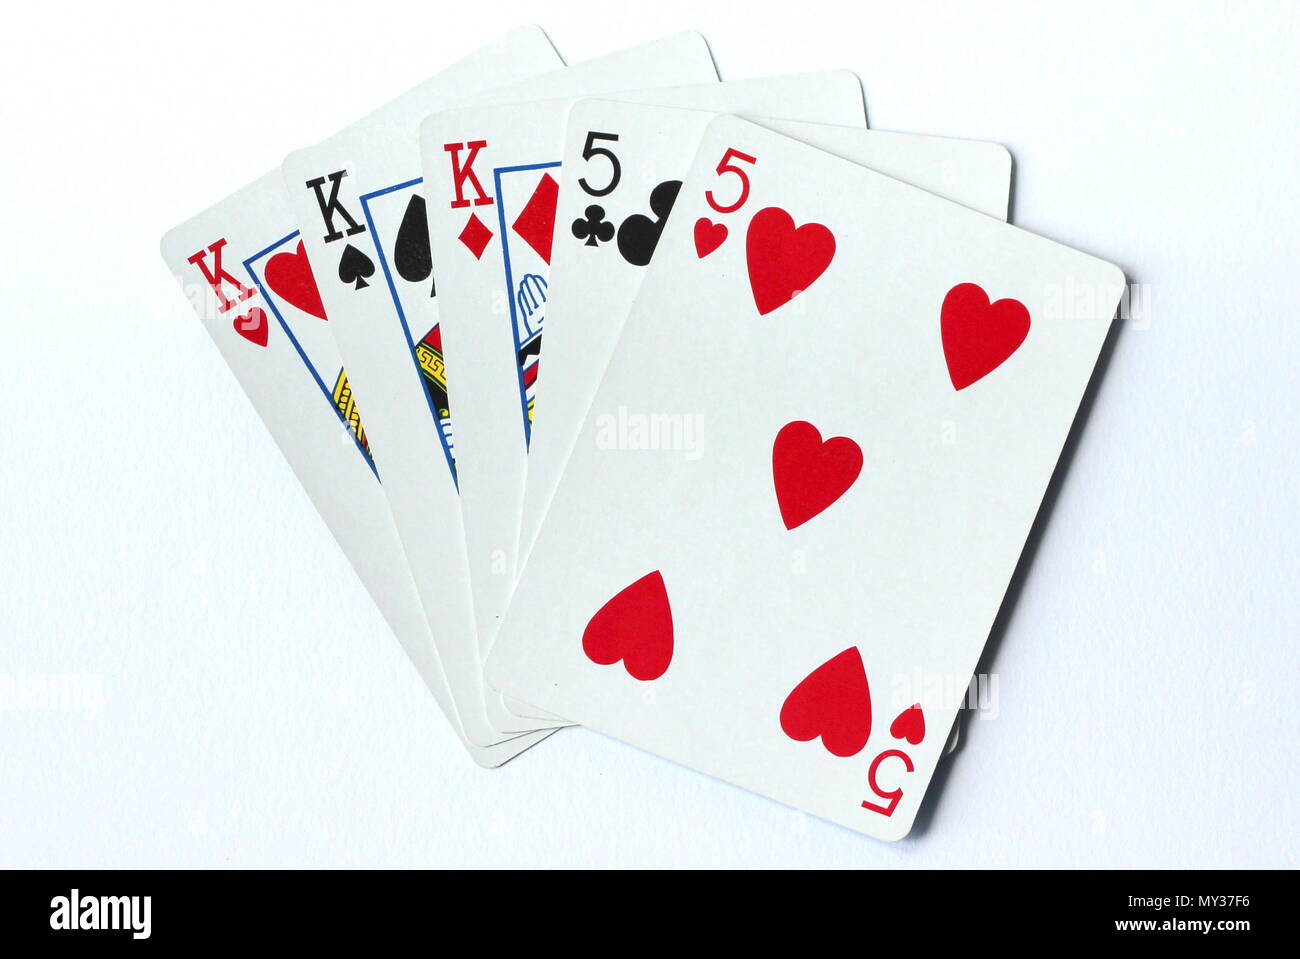 A full house deck of cards - poker Stock Photo